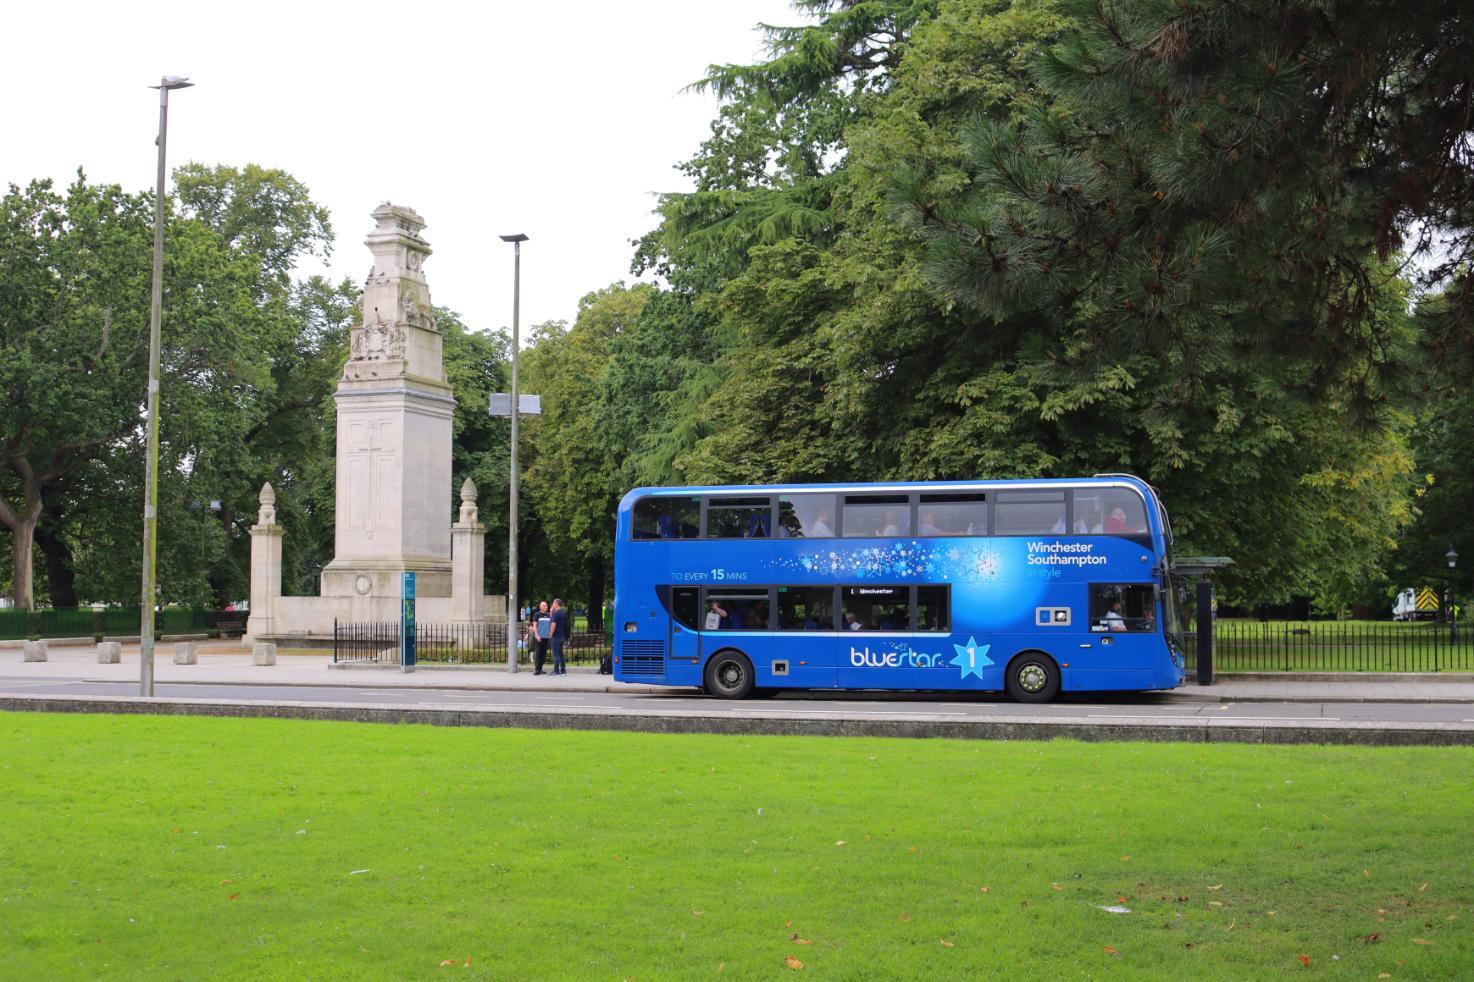 Bluestar Bus stopped at bus stop on Above Bart Street by the Cenotaph